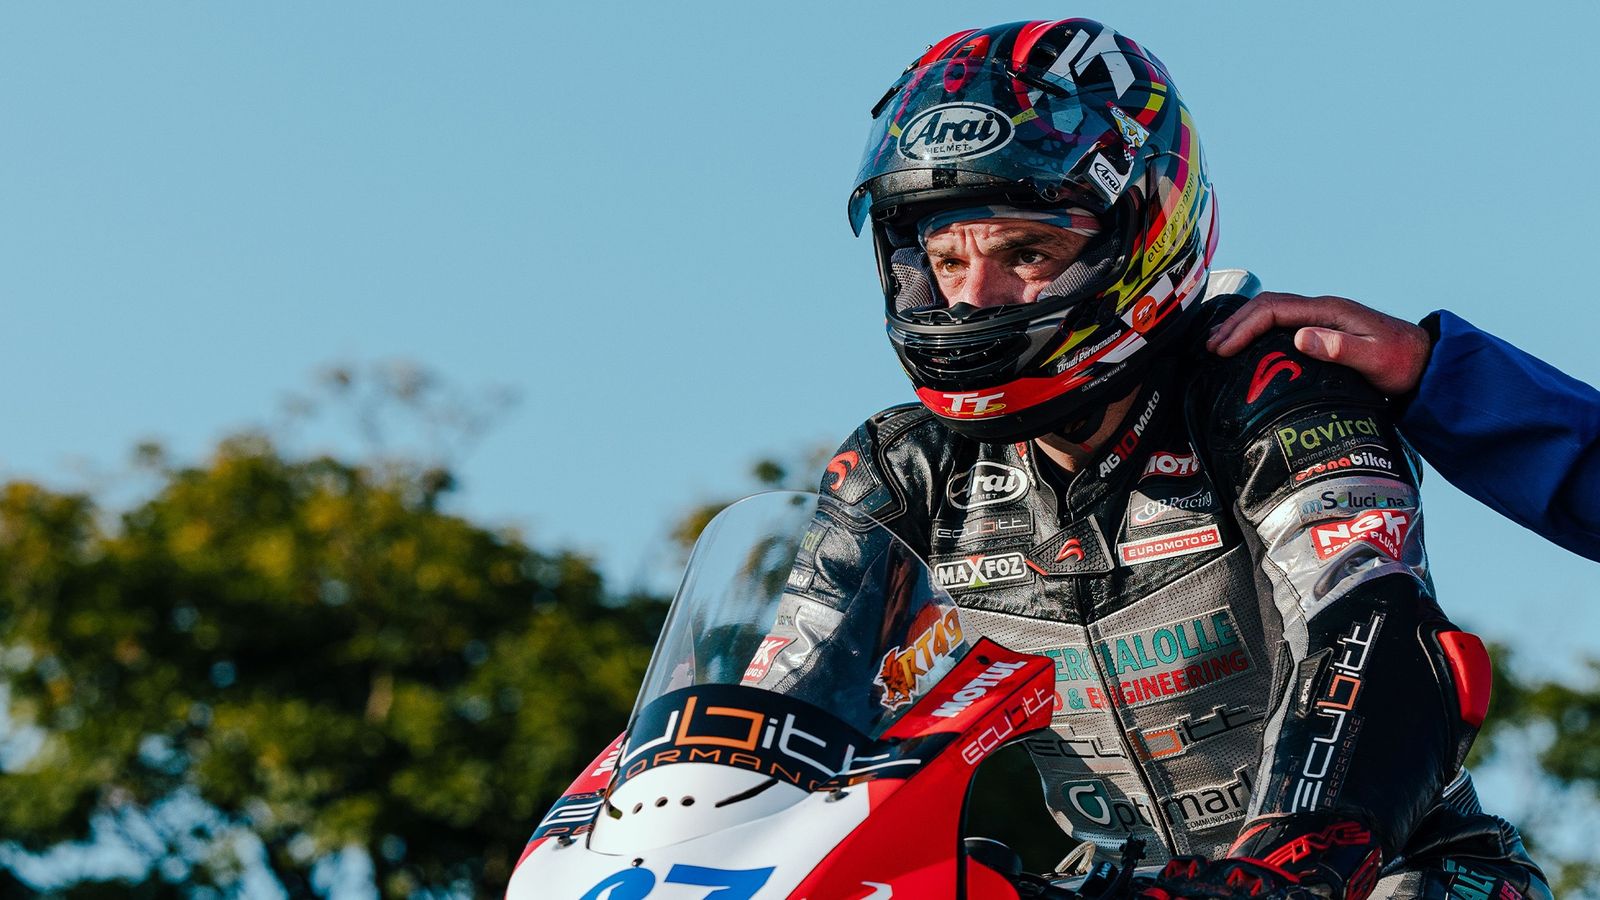 Isle of Man TT: Raul Torras Martinez dies after crash in first Supertwin Race of the year